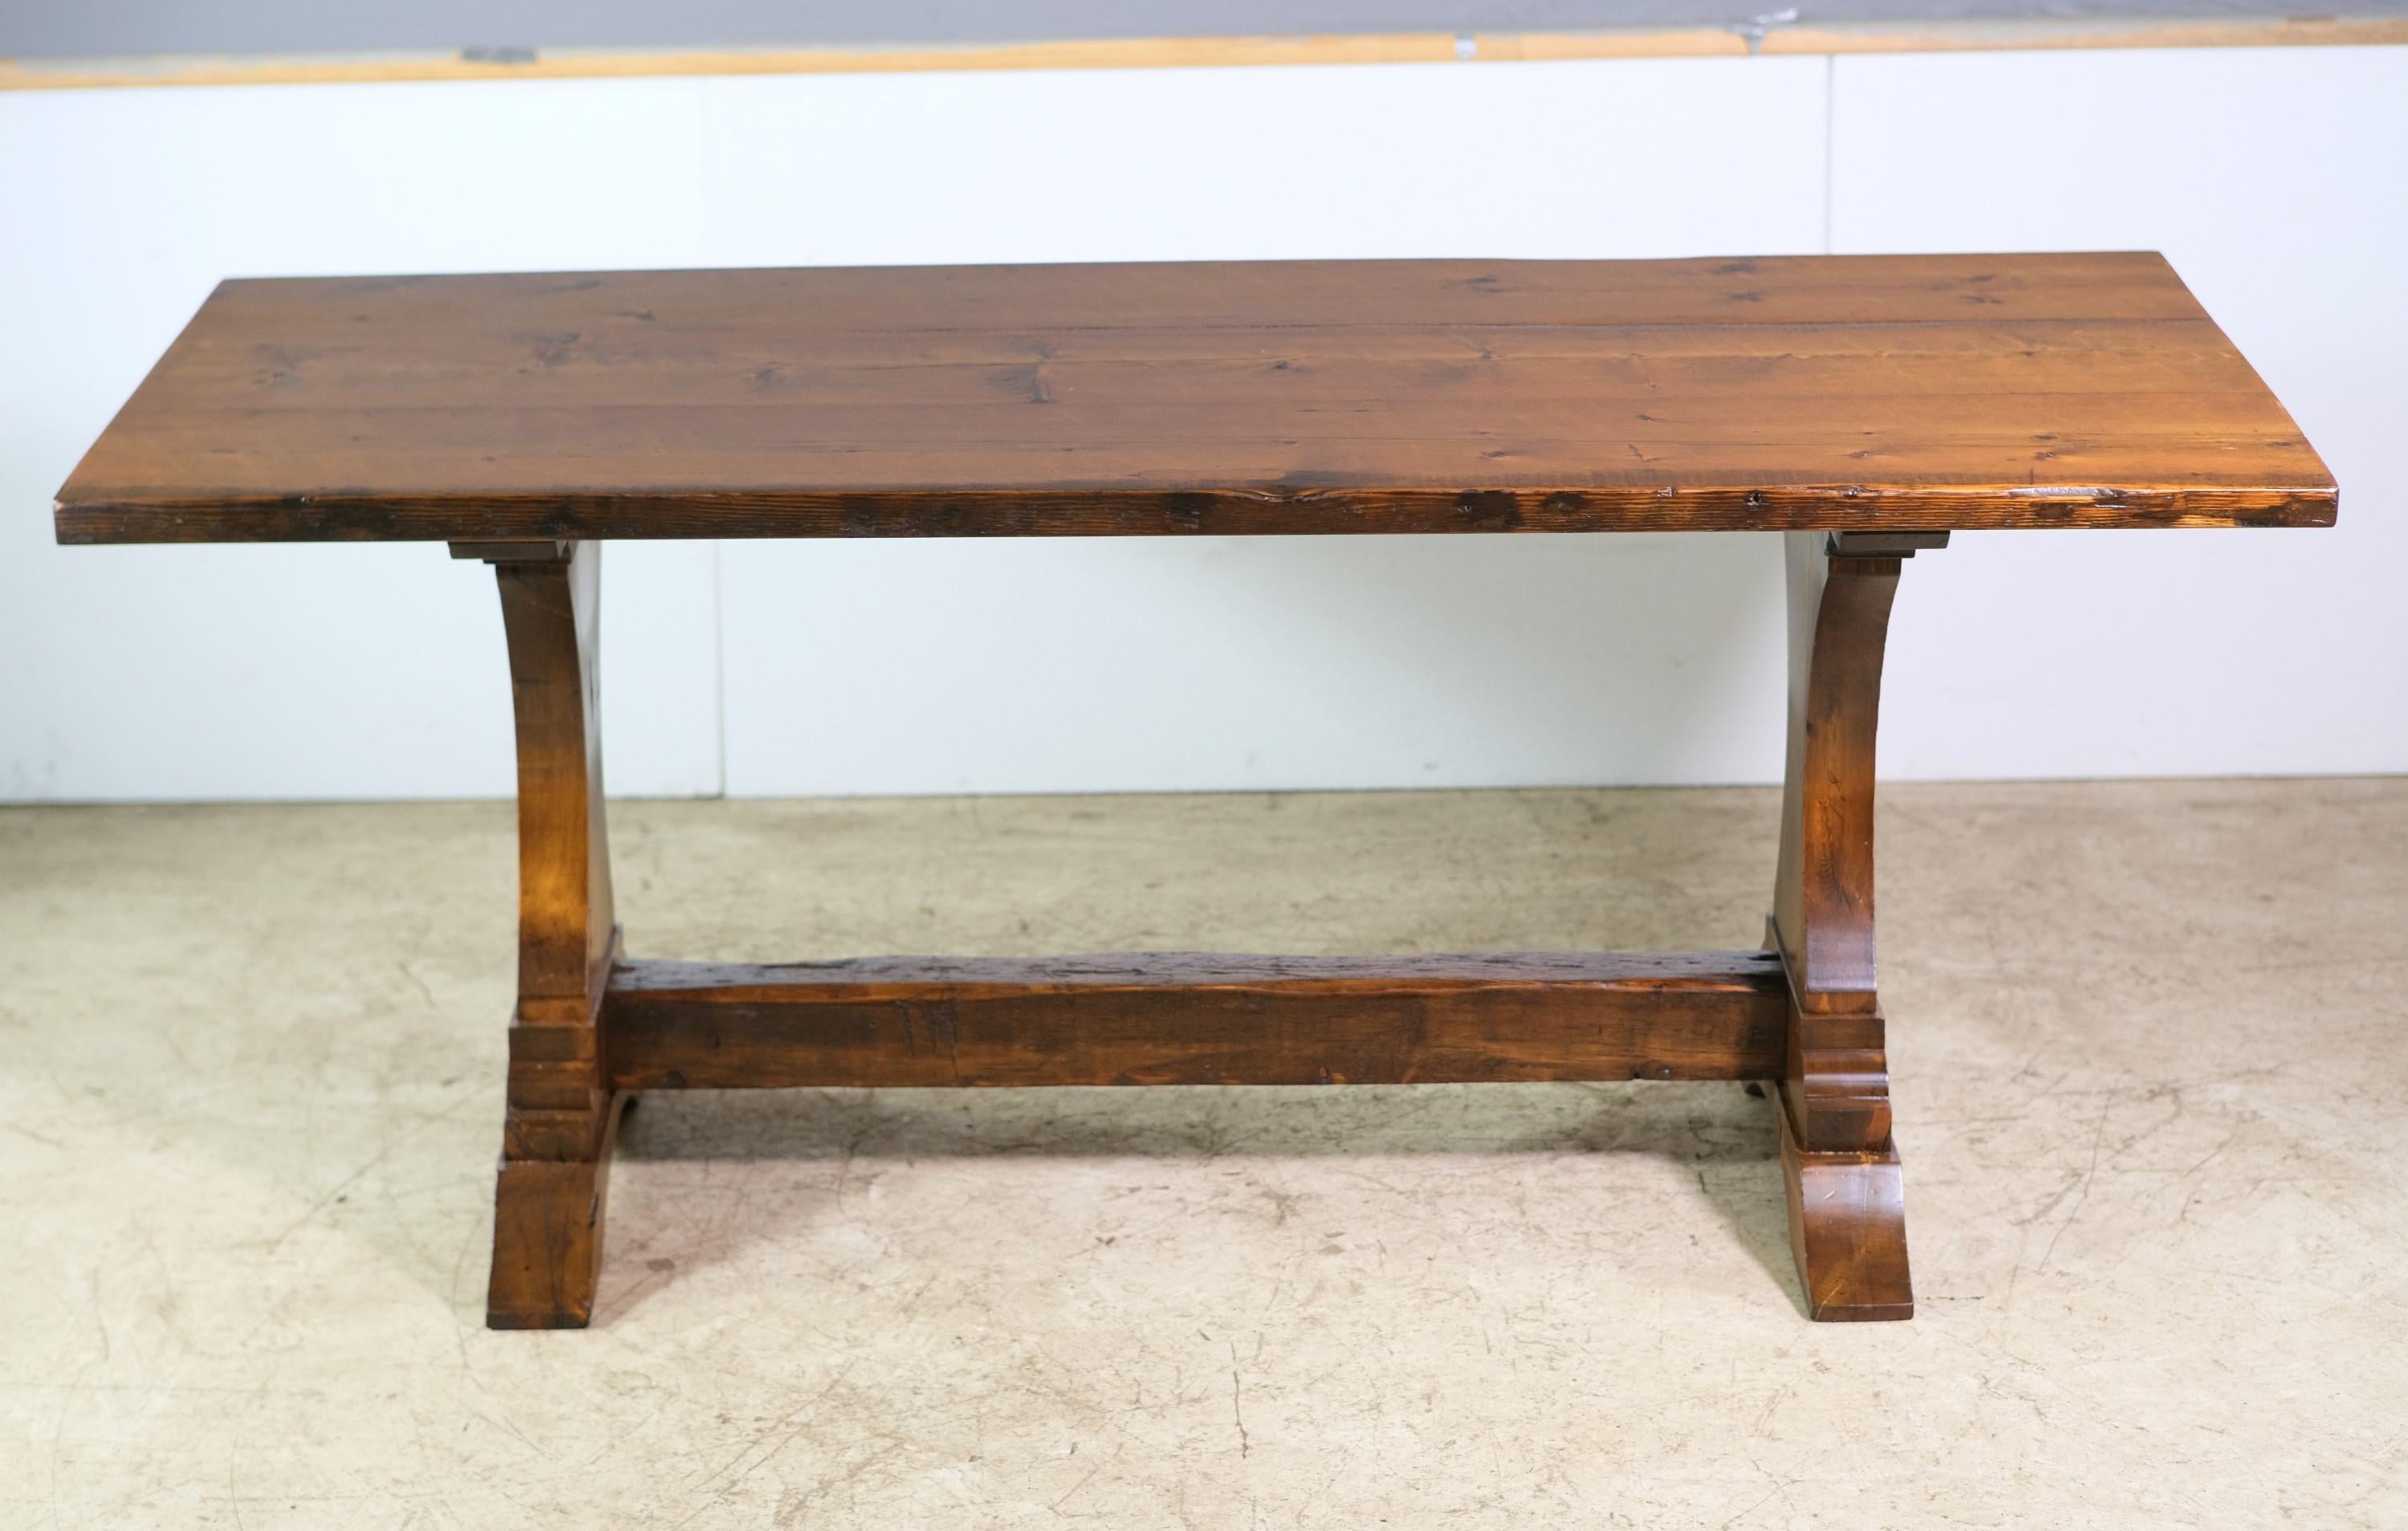 Newly made farm or harvest table made from reclaimed pine. Table features trestle legs. Nice and sturdy. This can be seen at our 400 Gilligan St location in Scranton, PA.